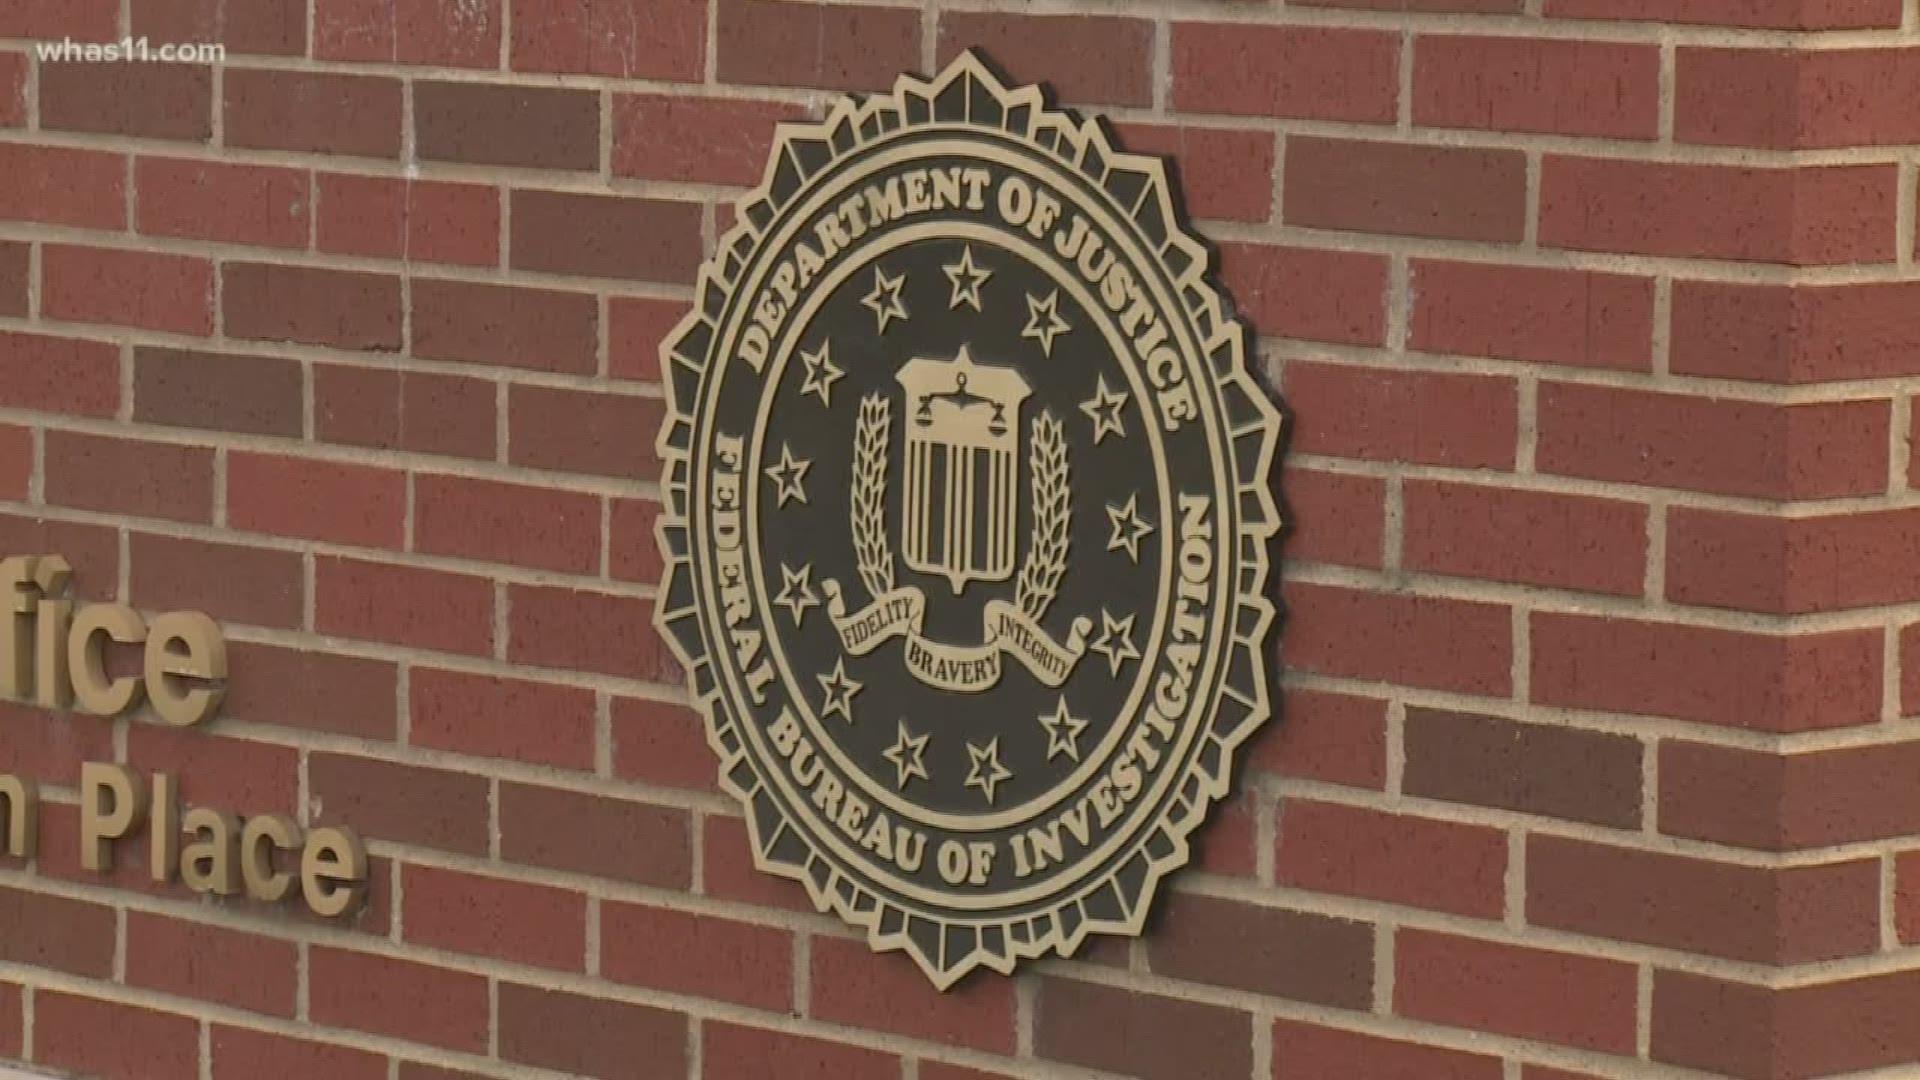 FBI agents in Louisville issued a warning to voters, political campaigns, over sharers on social media to watch out for those trying to influence your vote.